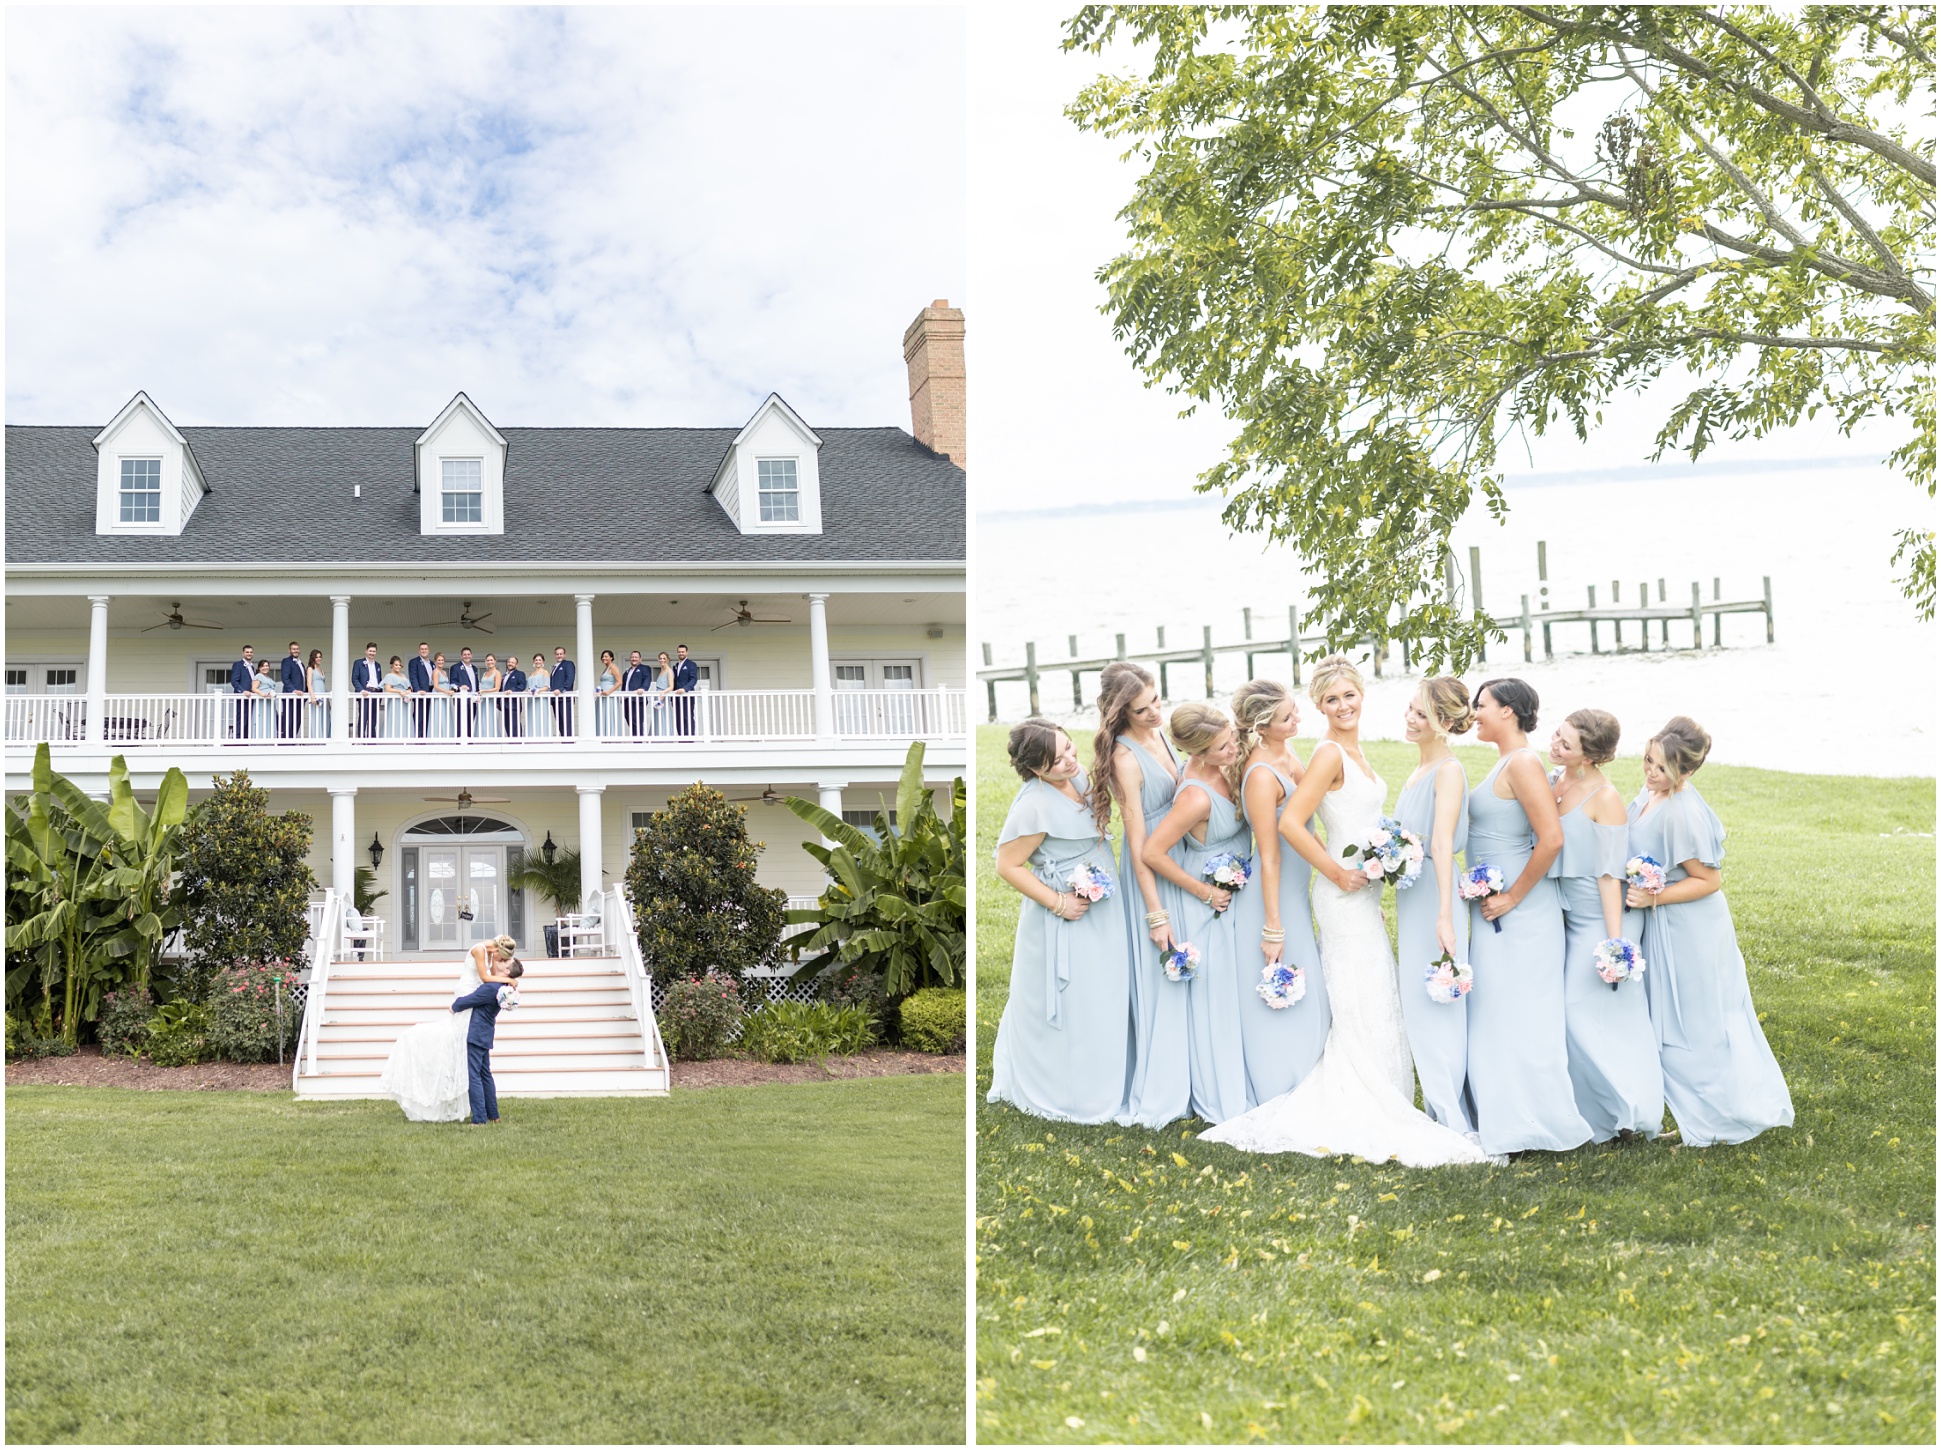 Left Image: Full bridal party on the front porch of the house, Right Image: Bridesmaids and and bride by the water